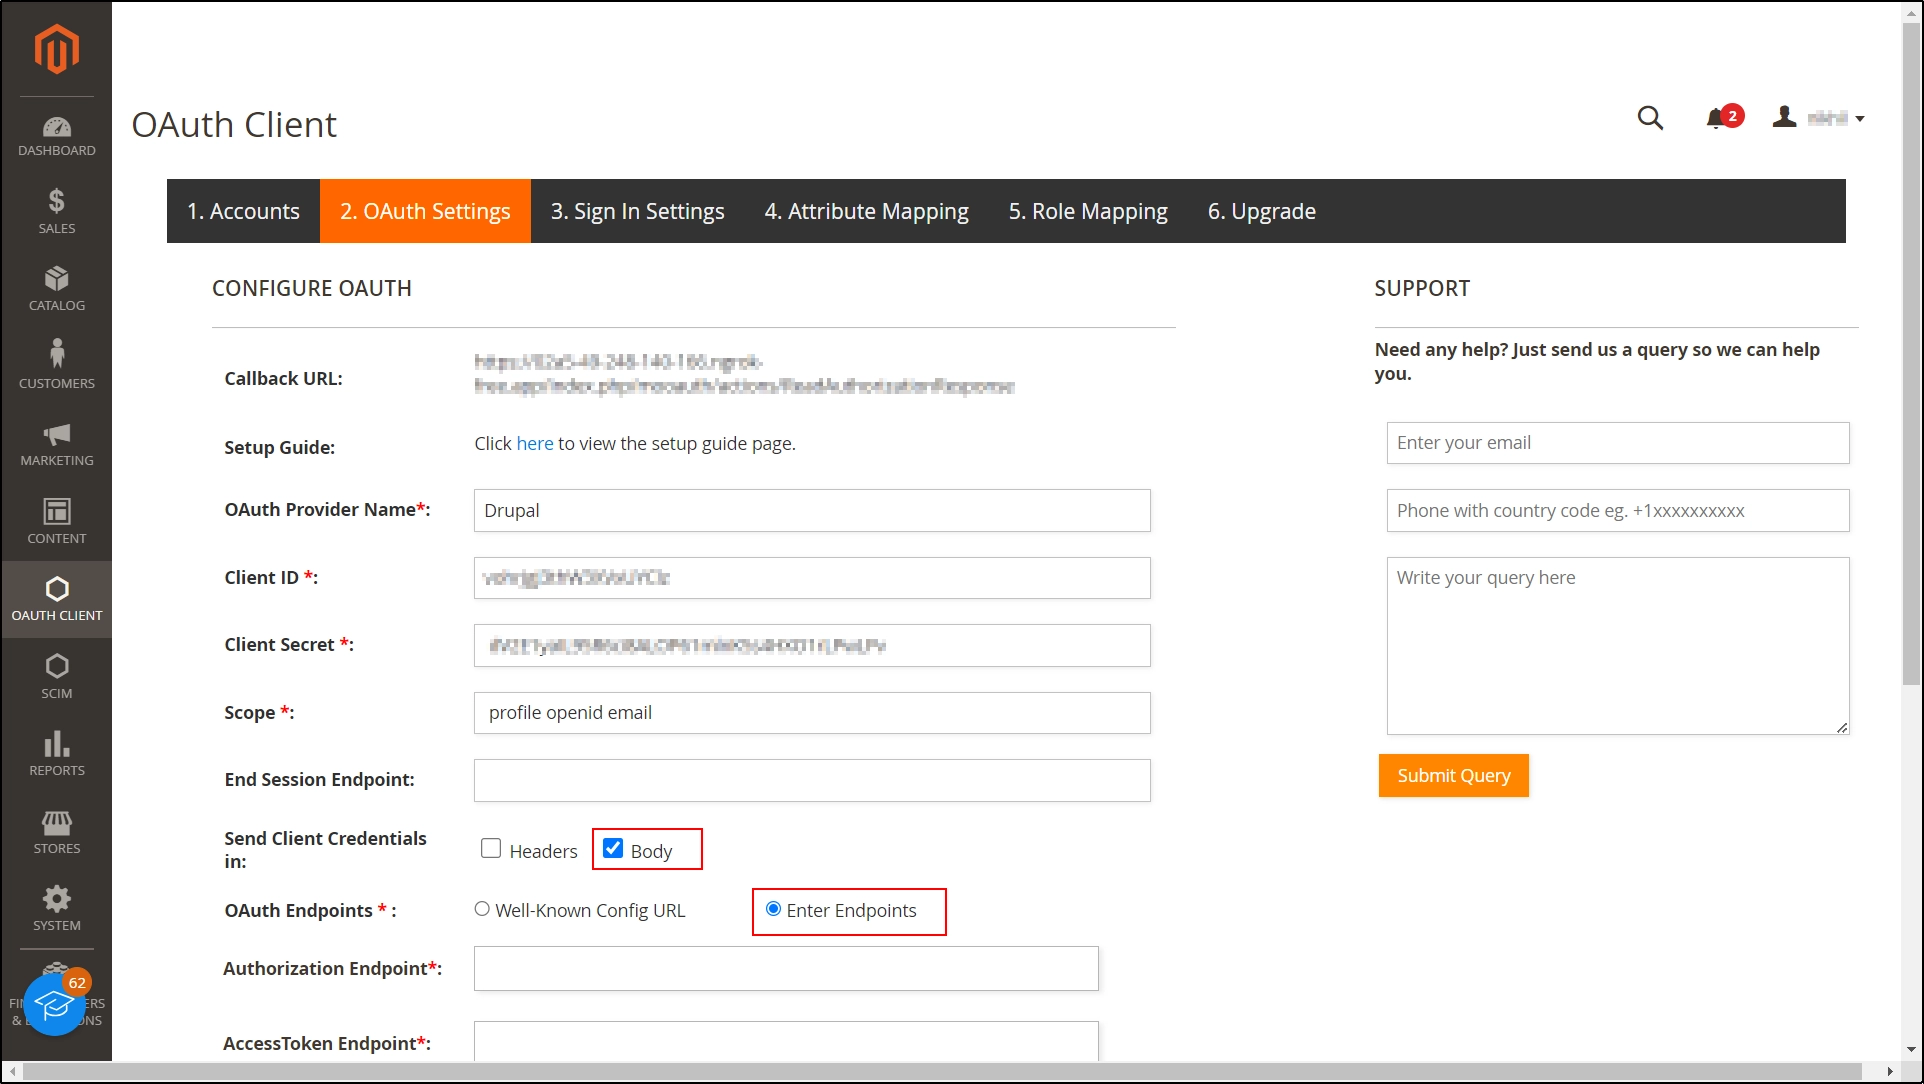 Drupal Magento OAuth/OIDC Provider - From OAuth Endpoints, choose the Enter Endpoints option